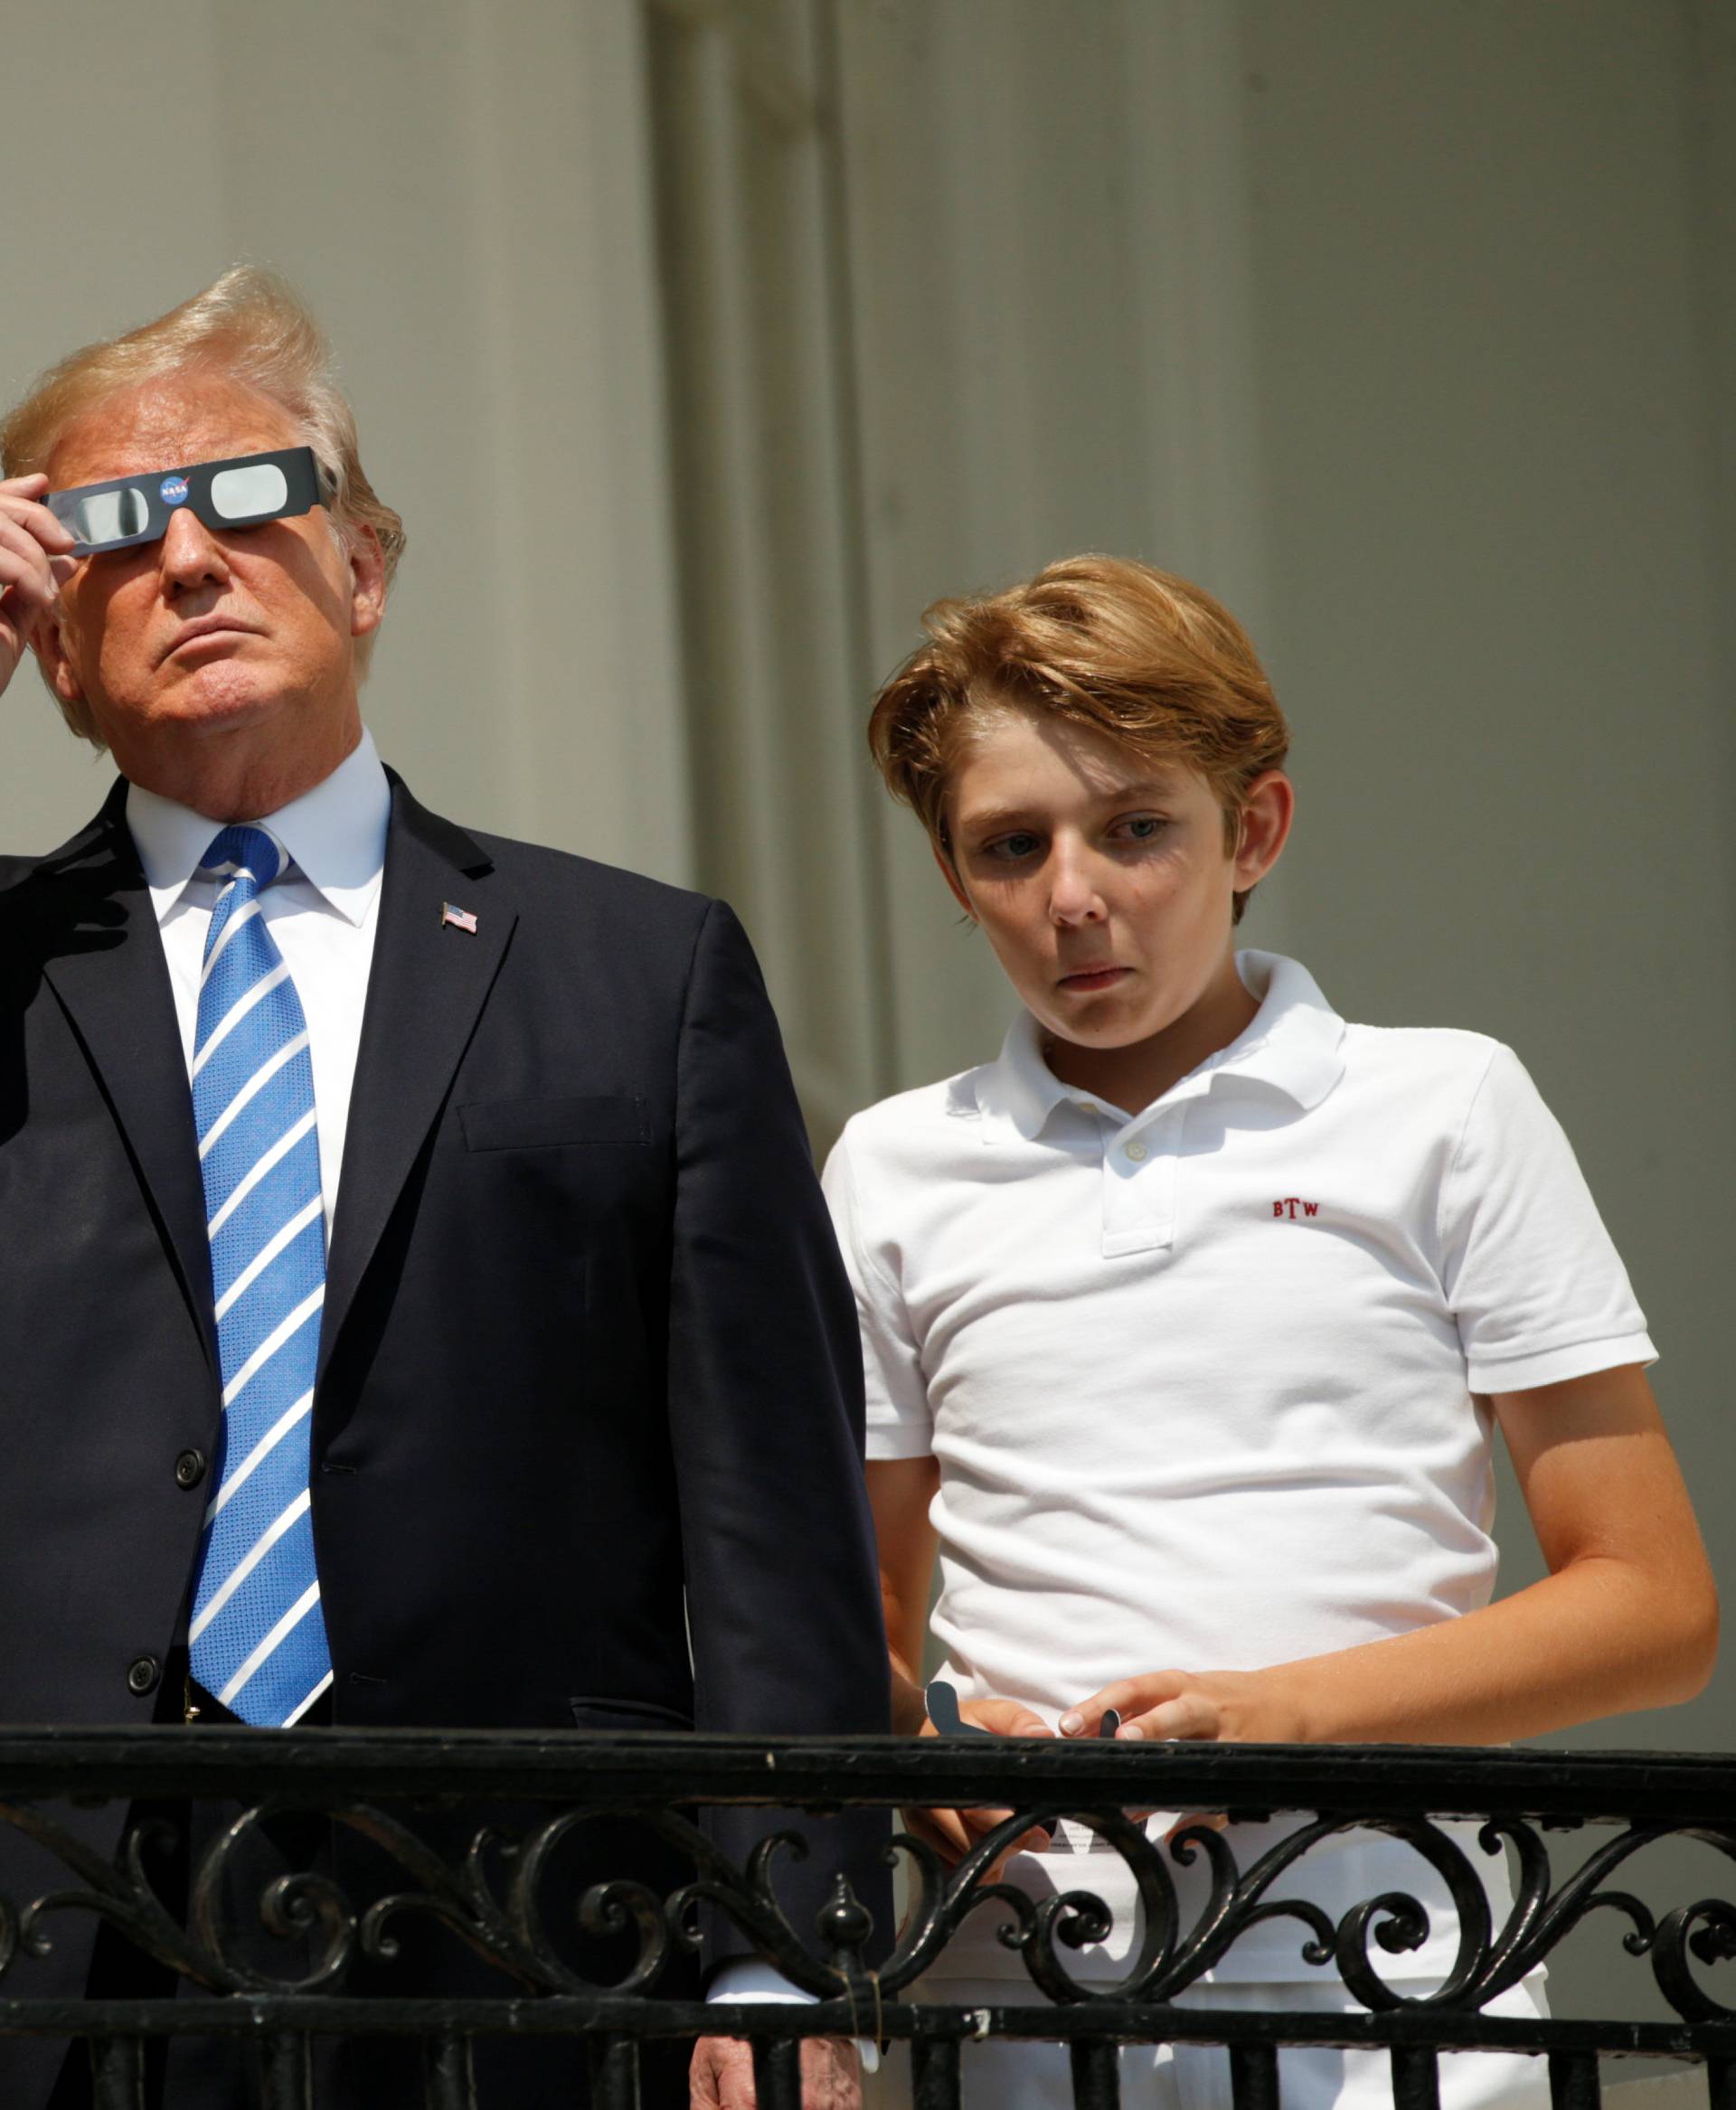 U.S. President Trump watches the solar eclipse with first Lady Melania Trump and son Barron from the Truman Balcony at the White House in Washington